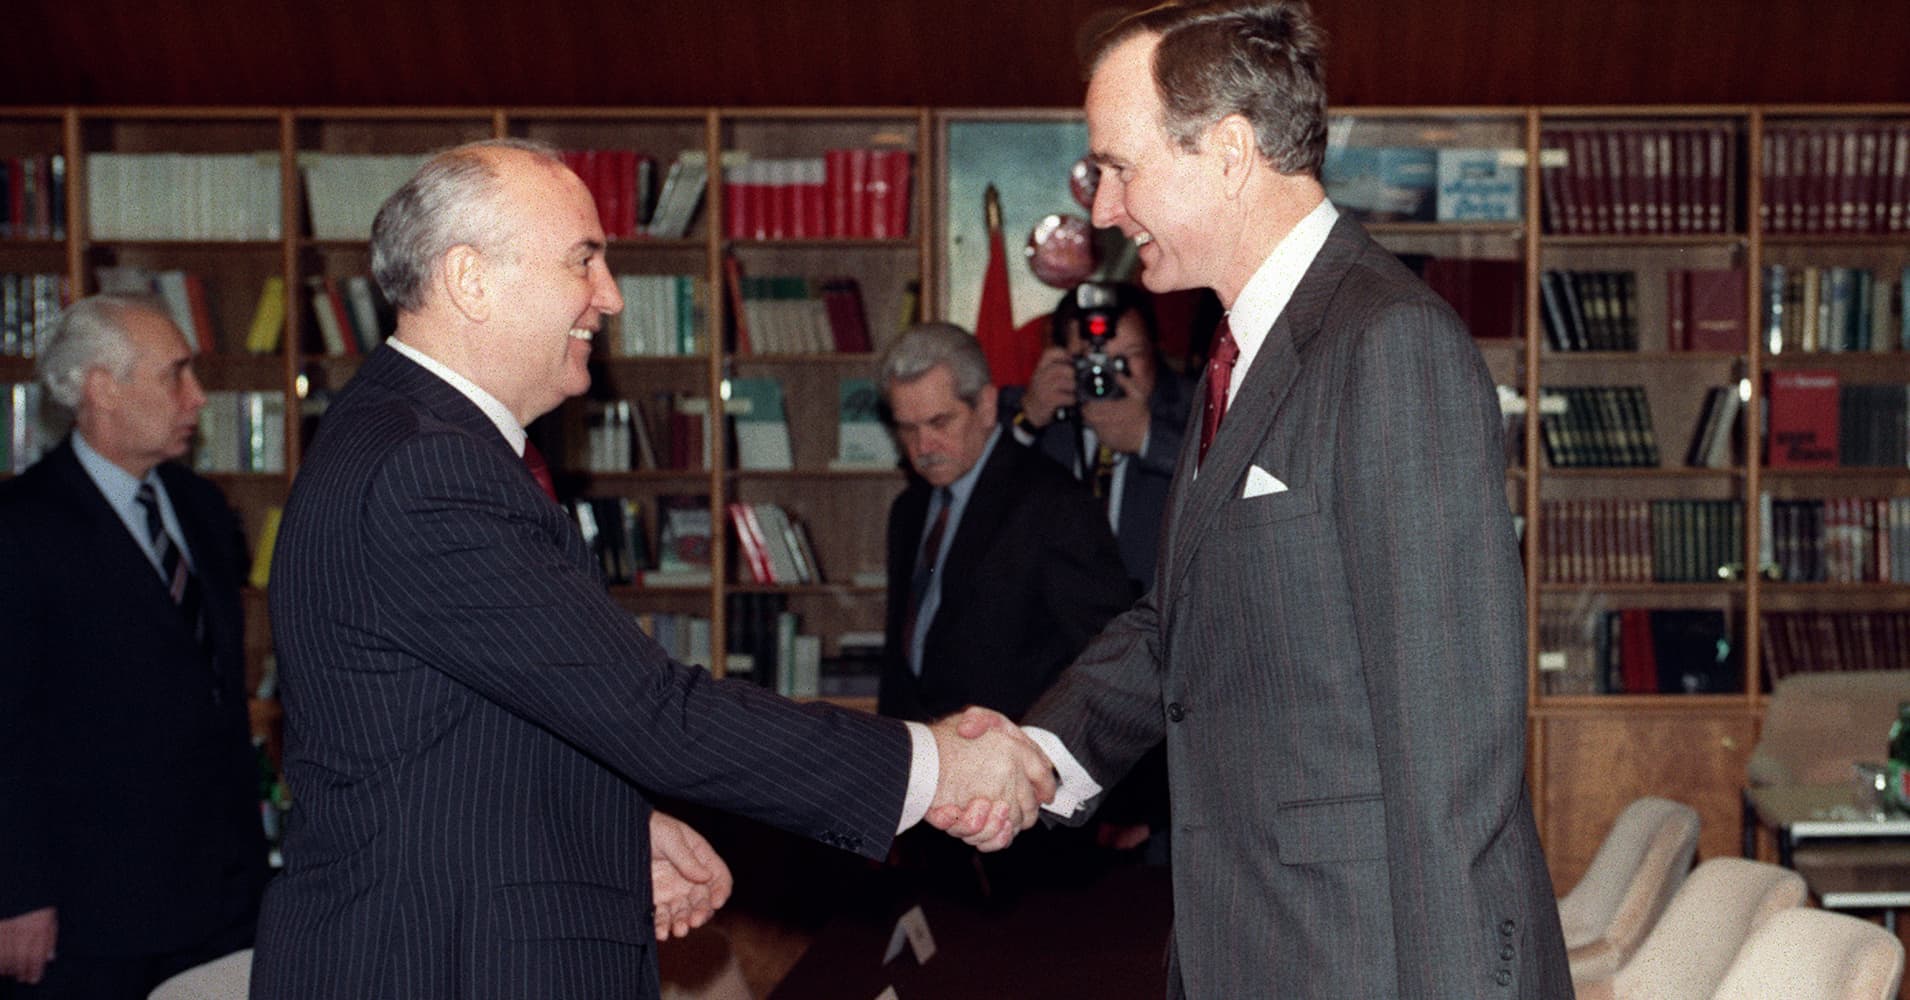 Soviet leader Mikhail Gorbachev (L) and US President George Bush (R) shake hands on December 02, 1989 on board the soviet cruise 'Maxim Gorki', shipdocked at Marsaxlokk harbour, before the start of their first summit meeting, just a few weeks after the fall of the Berlin Wall. This summit is viewed as the official end of the Cold War. 